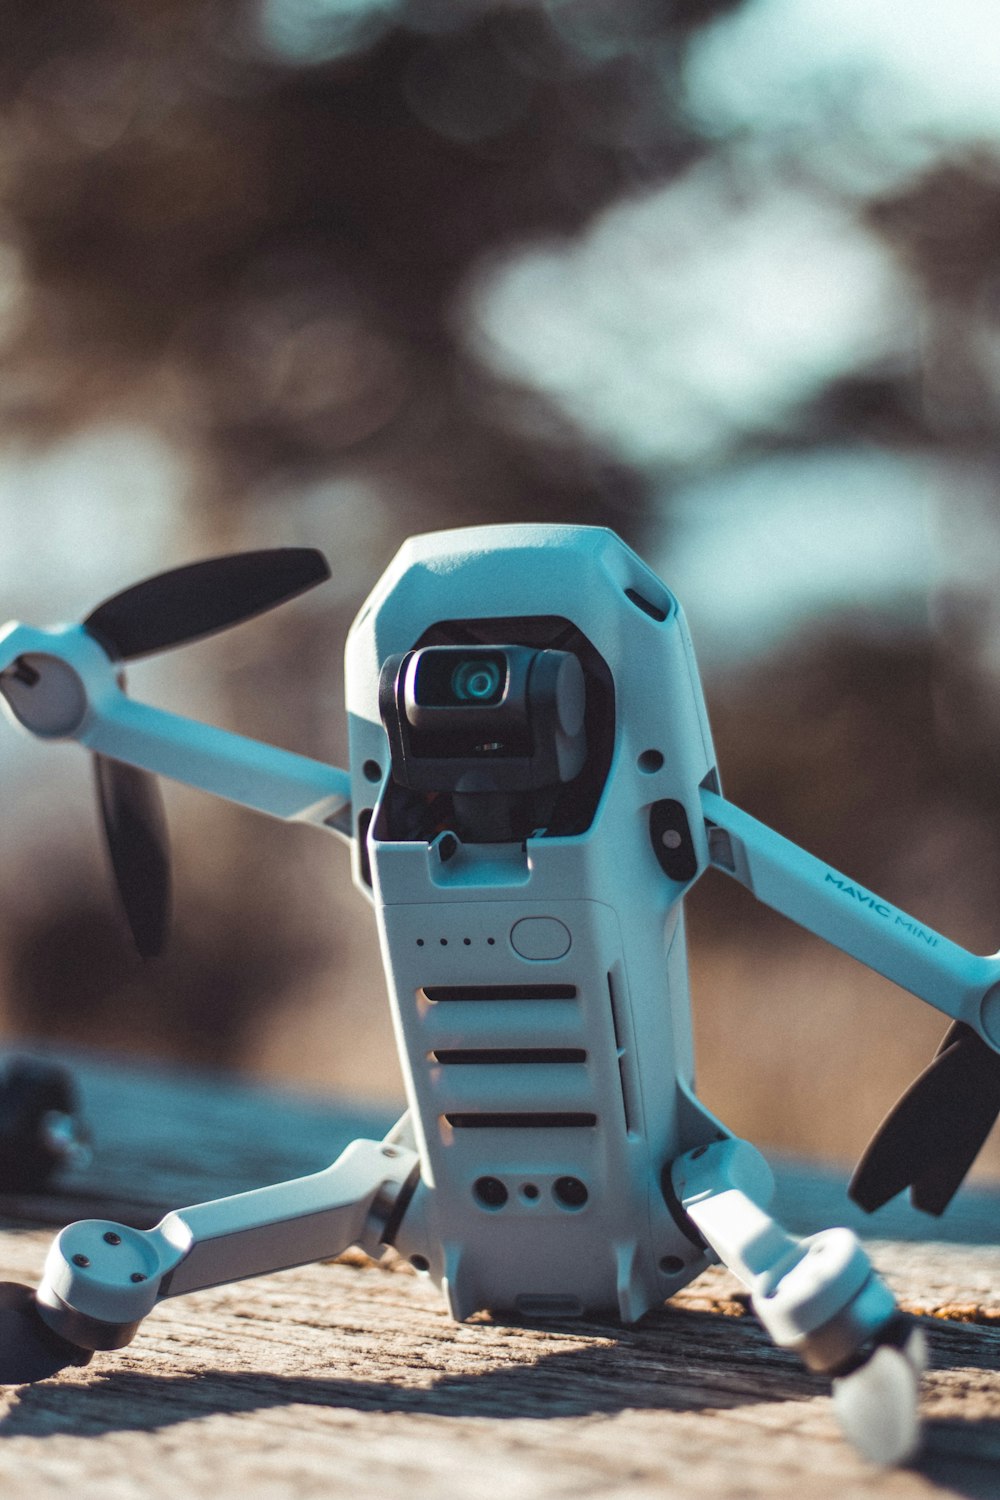 blue and black drone in close up photography